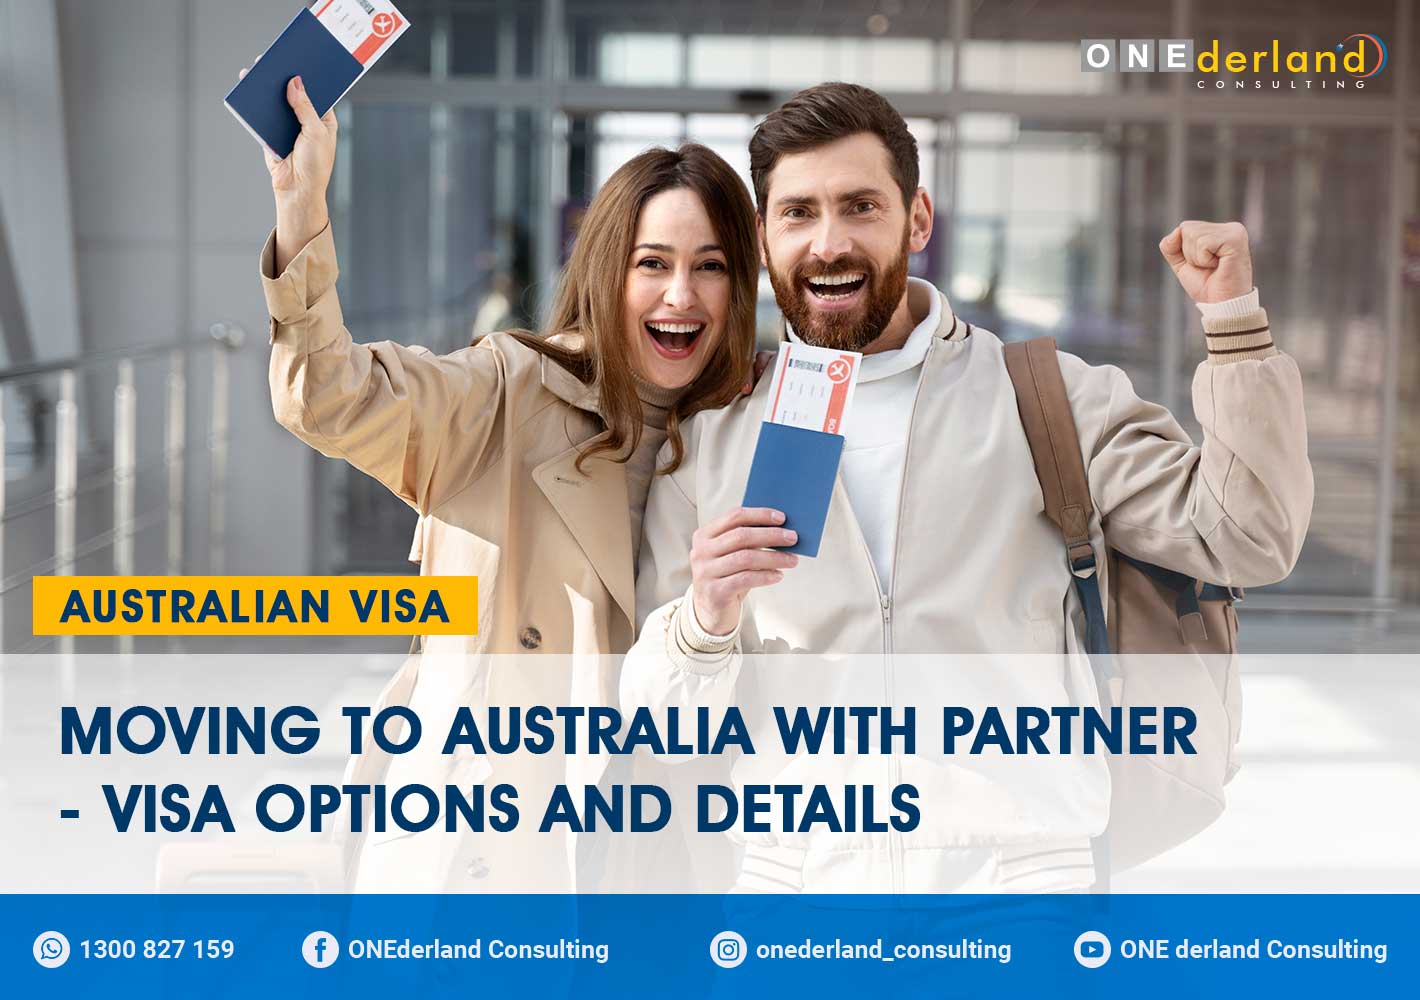 Moving to Australia with Partner - Visa Options and Details